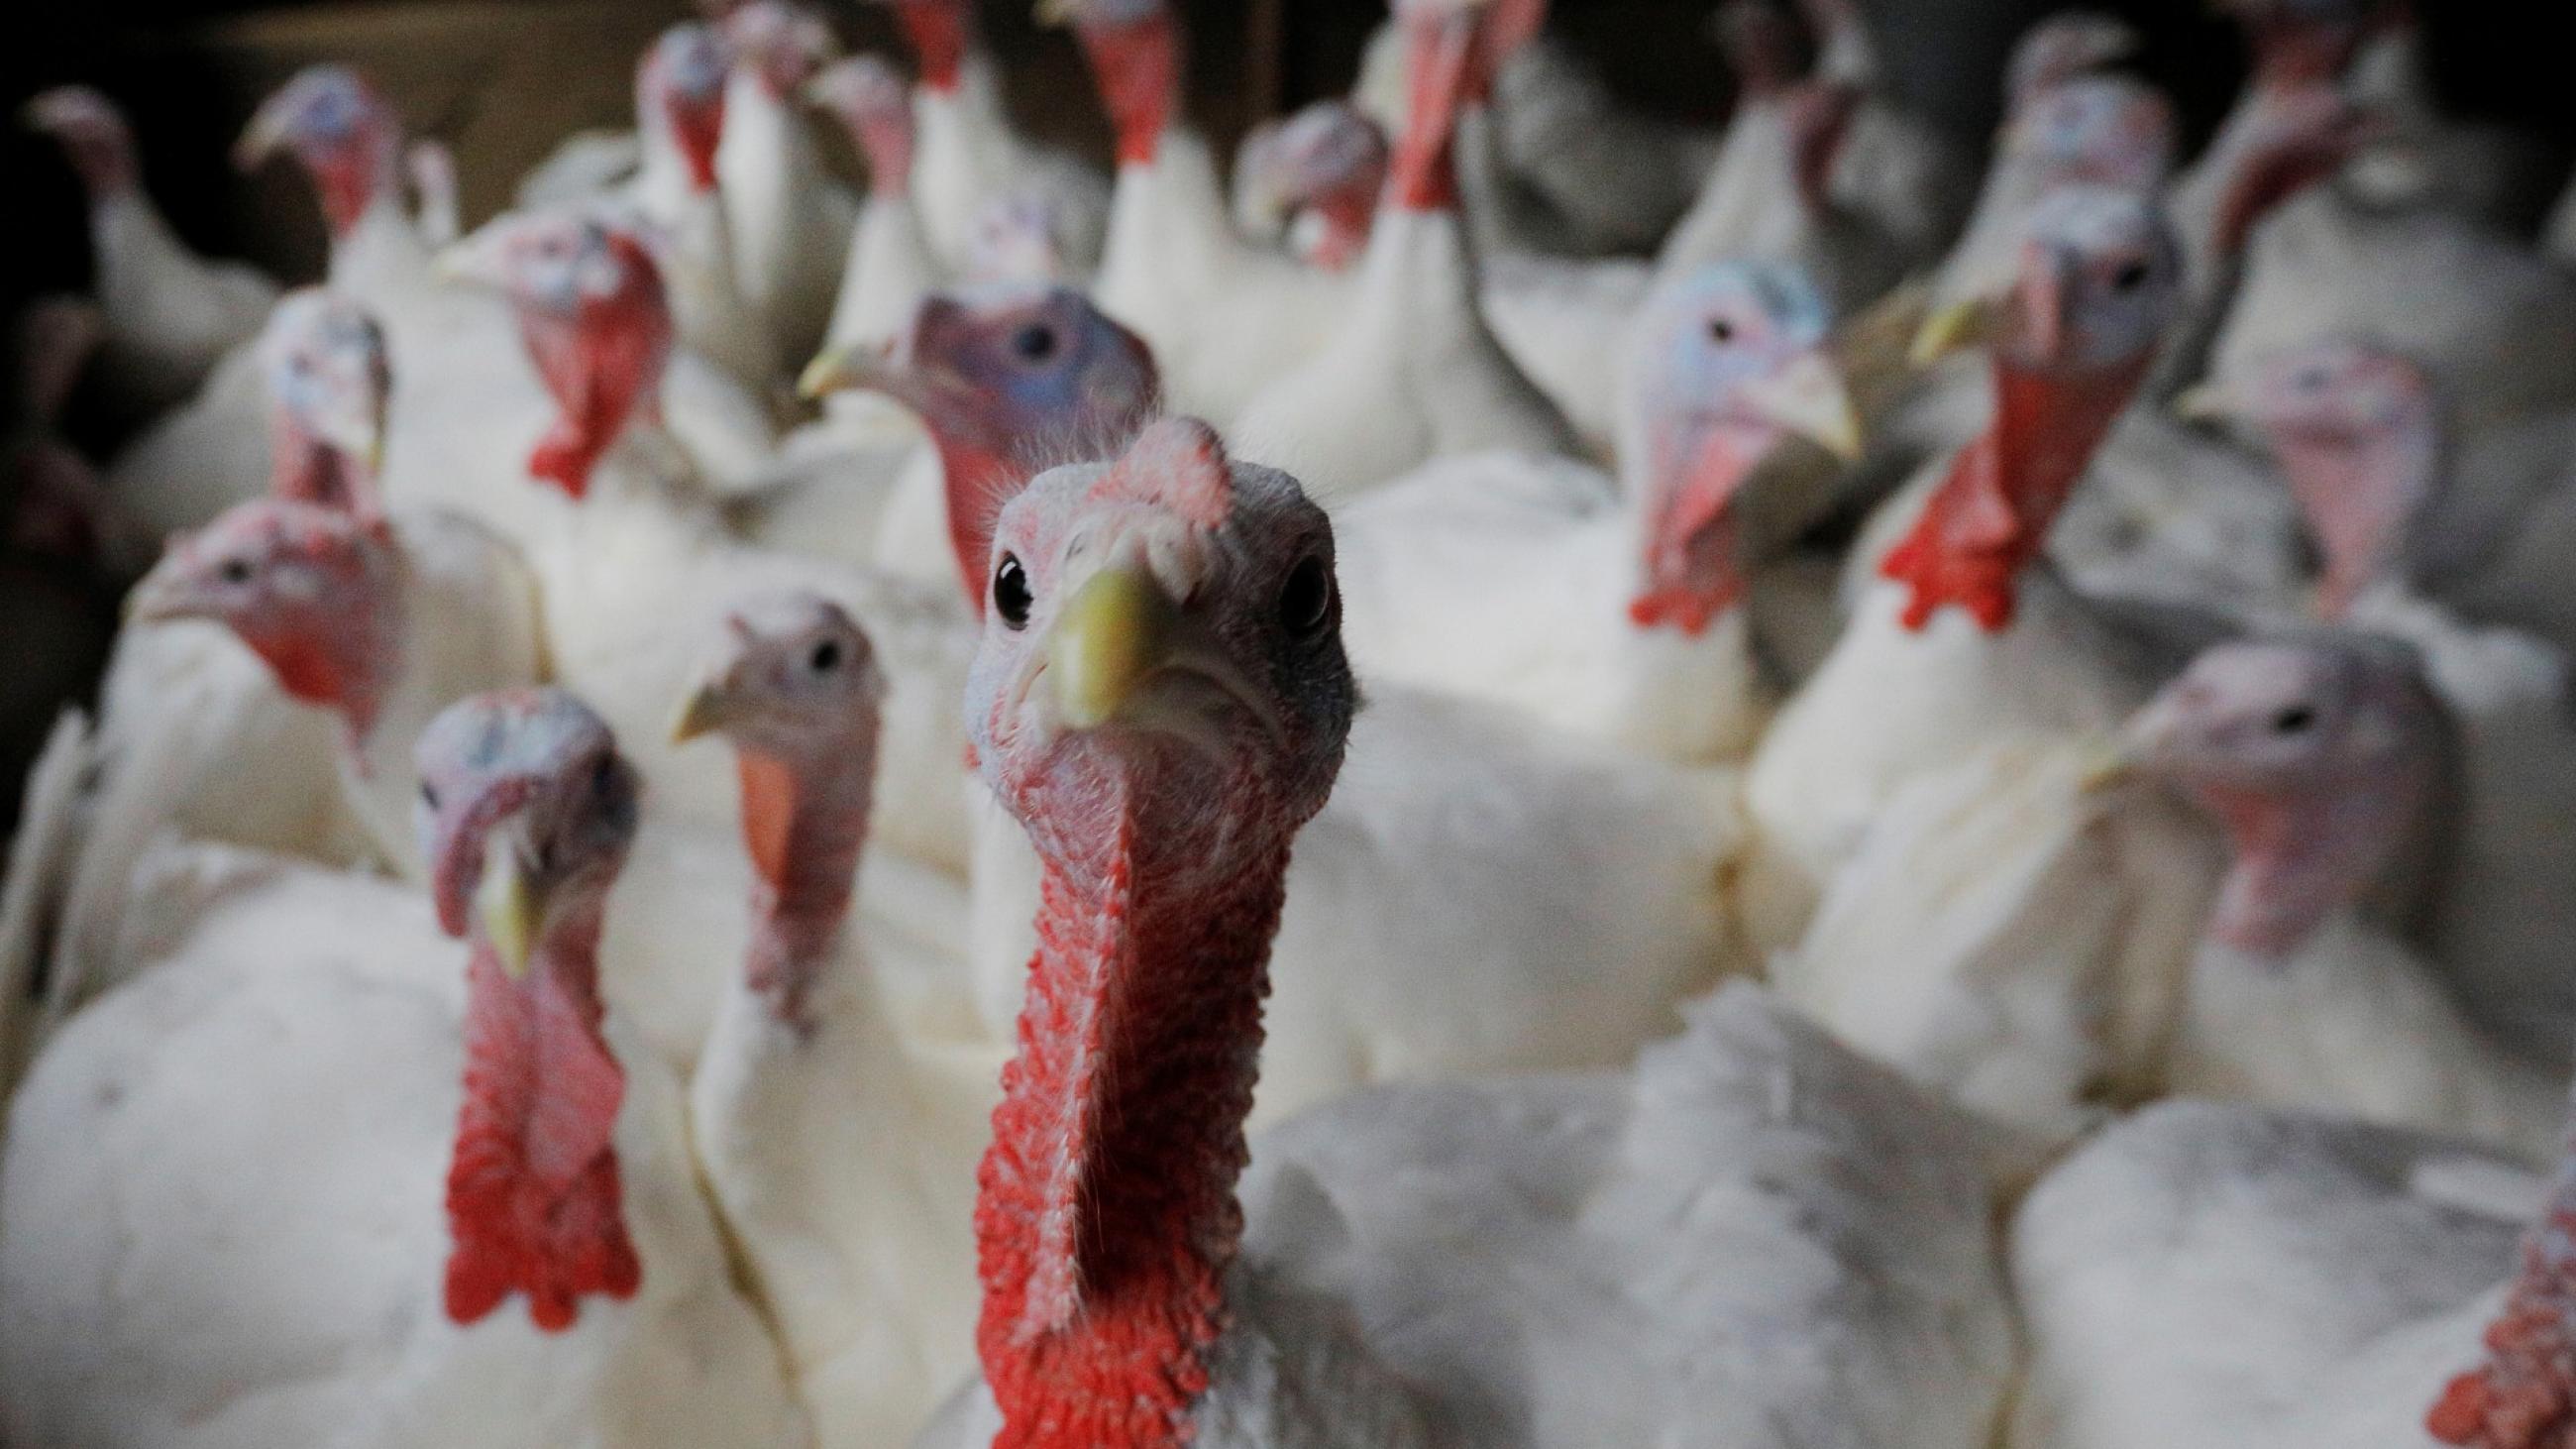 Turkeys stand in their barn at Seven Acres Farm one day before the Thanksgiving holiday, in North Reading, Massachusetts, on November 22, 2017.